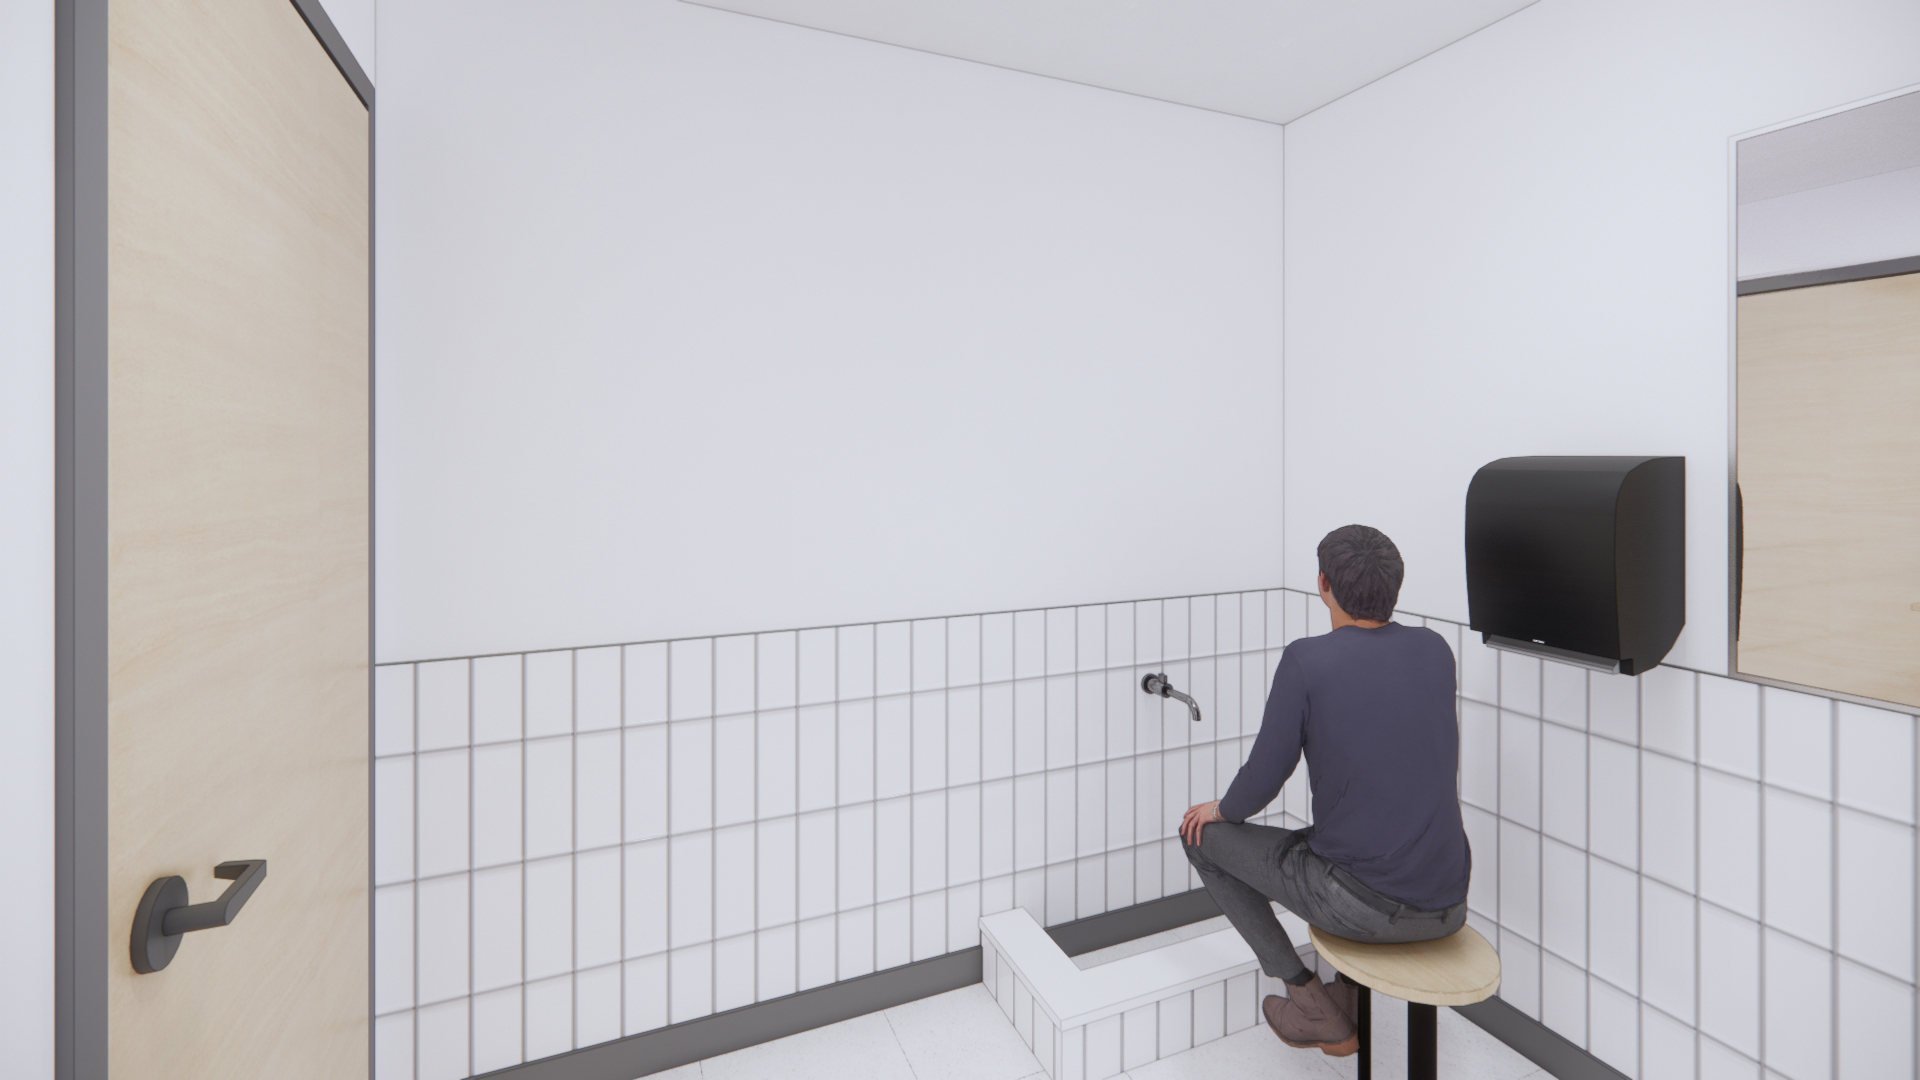 Rendering of CIE Ablution Space